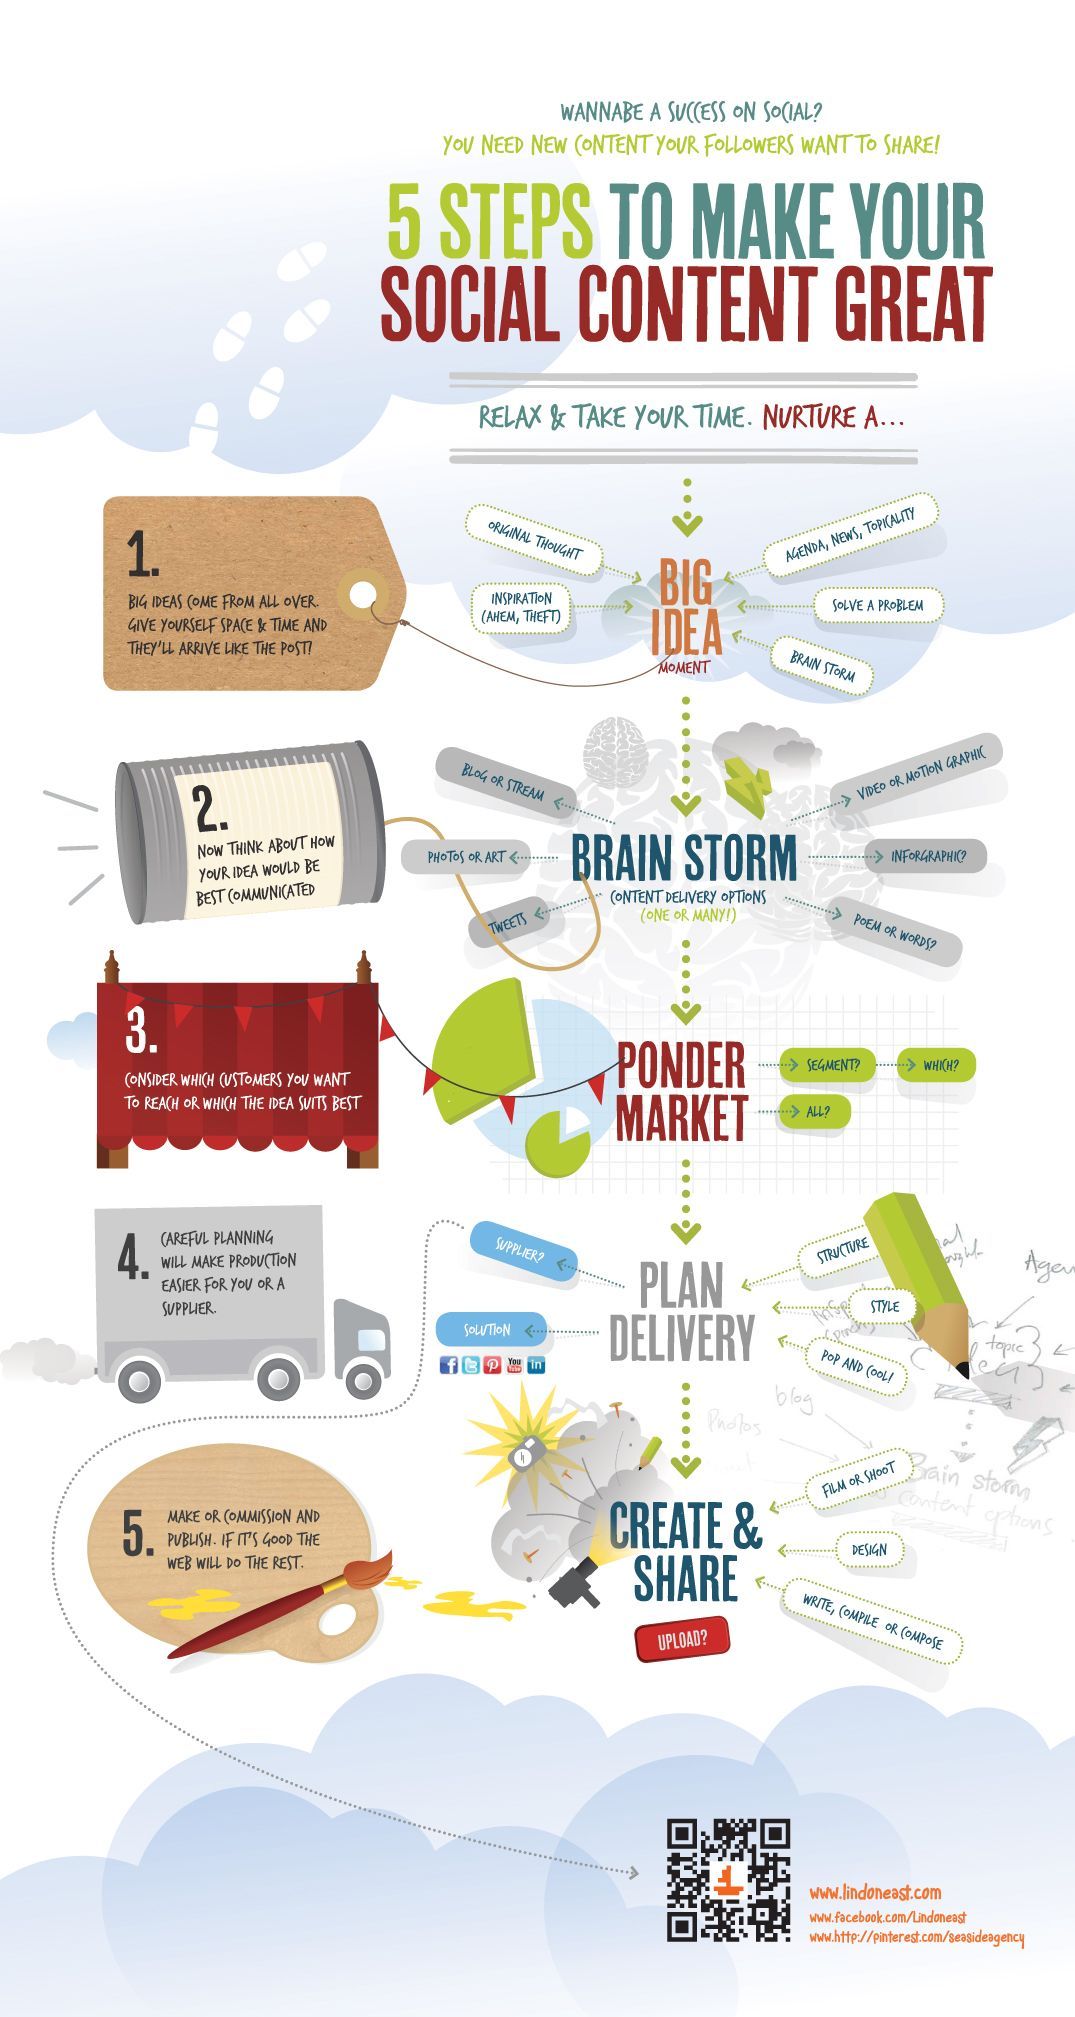 5 Steps To Great Social Content – #INFOGRAPHIC – #Social #Media #Content